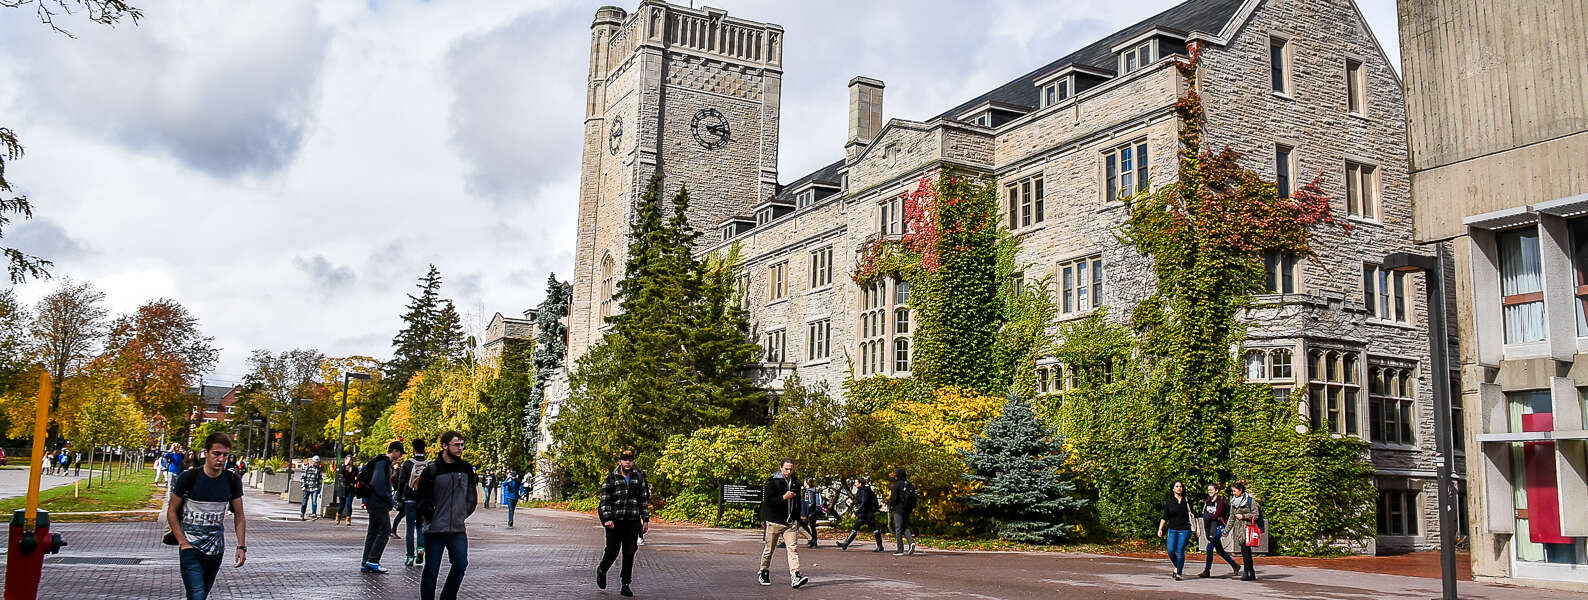 A wide view of students walking past ivy-covered Johnston Hall